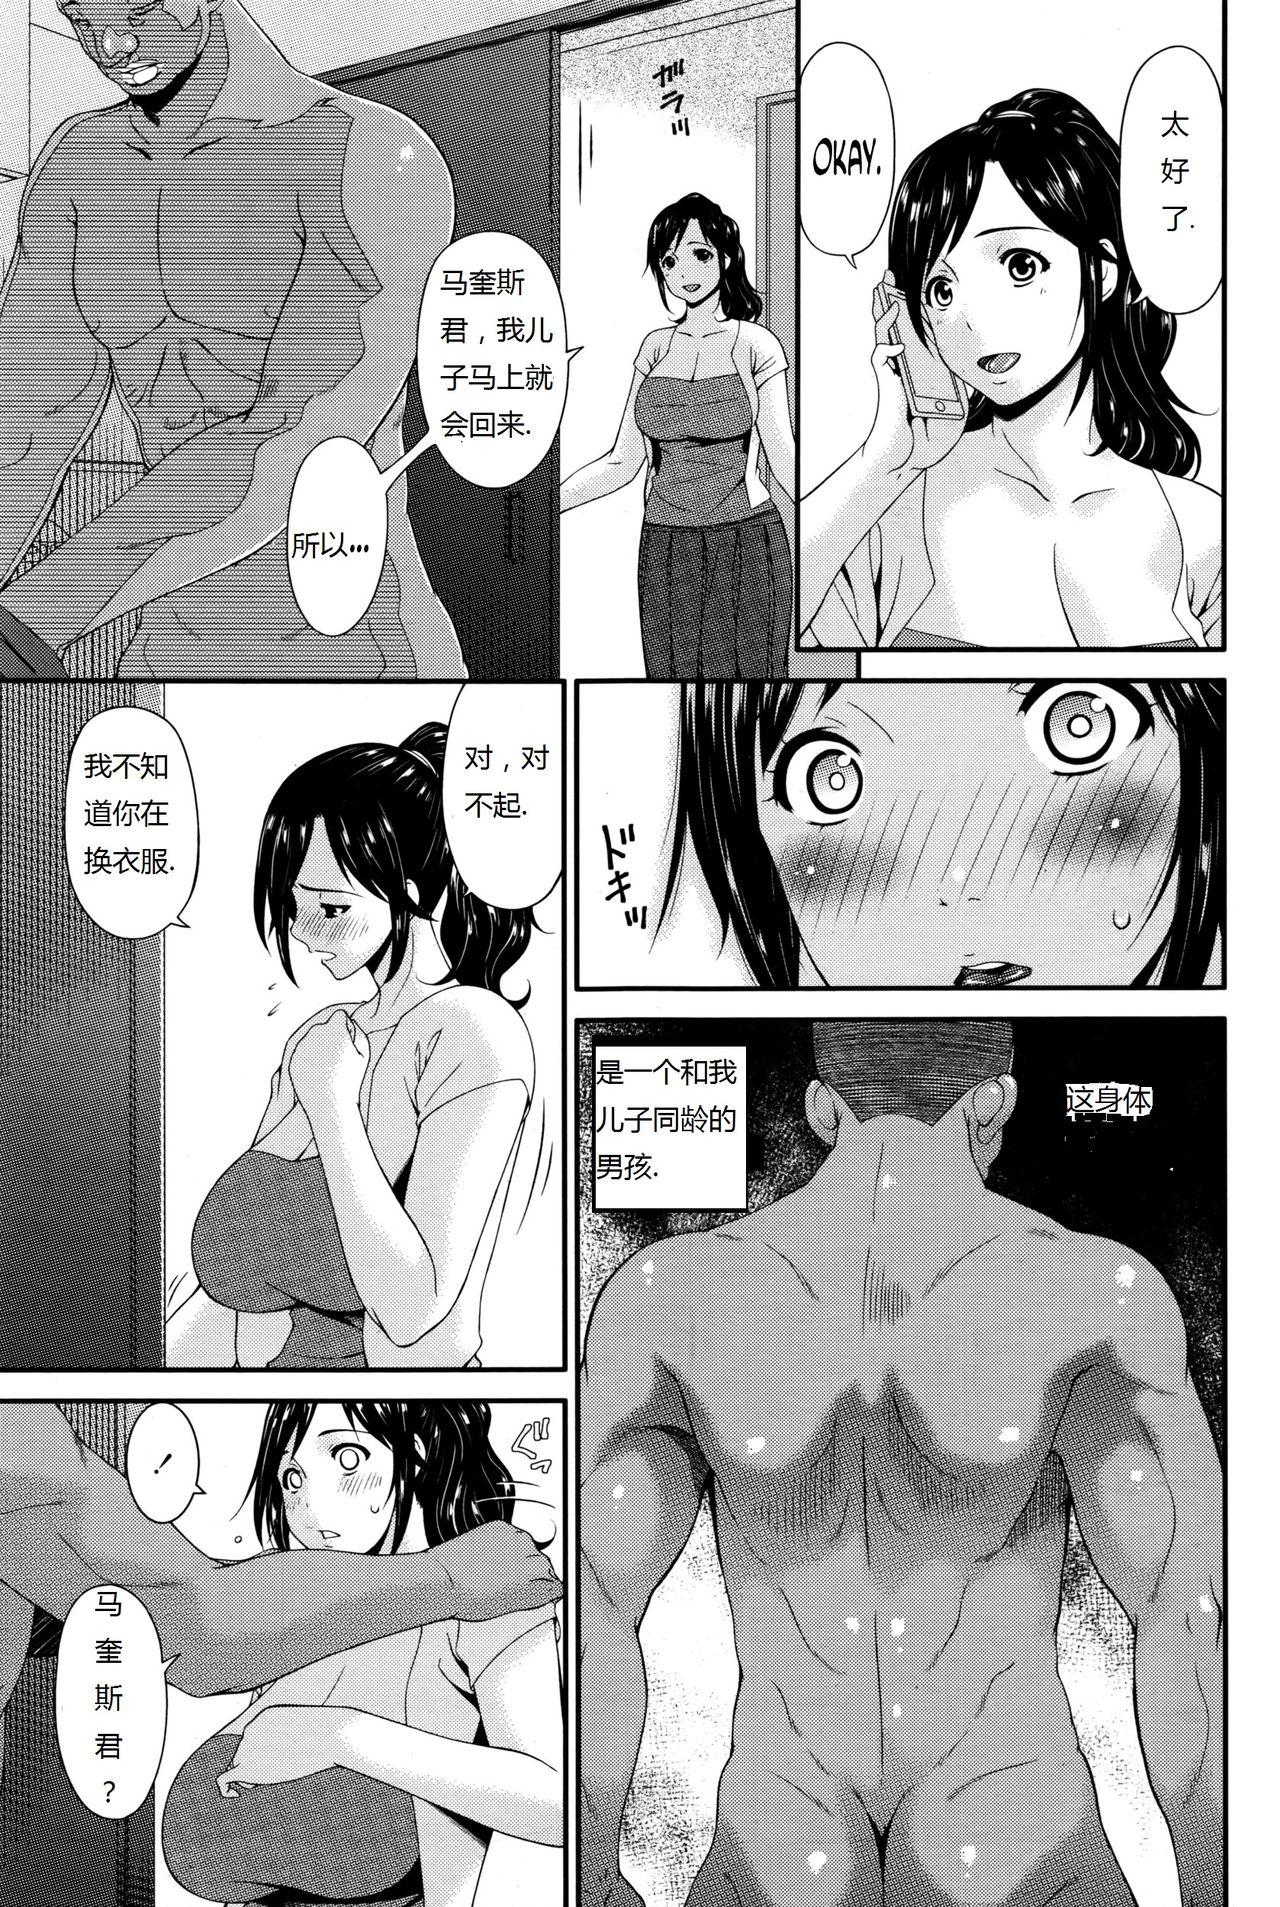 Moms Youbo | Impregnated Mother Ch. 1-5 Sucks - Page 5